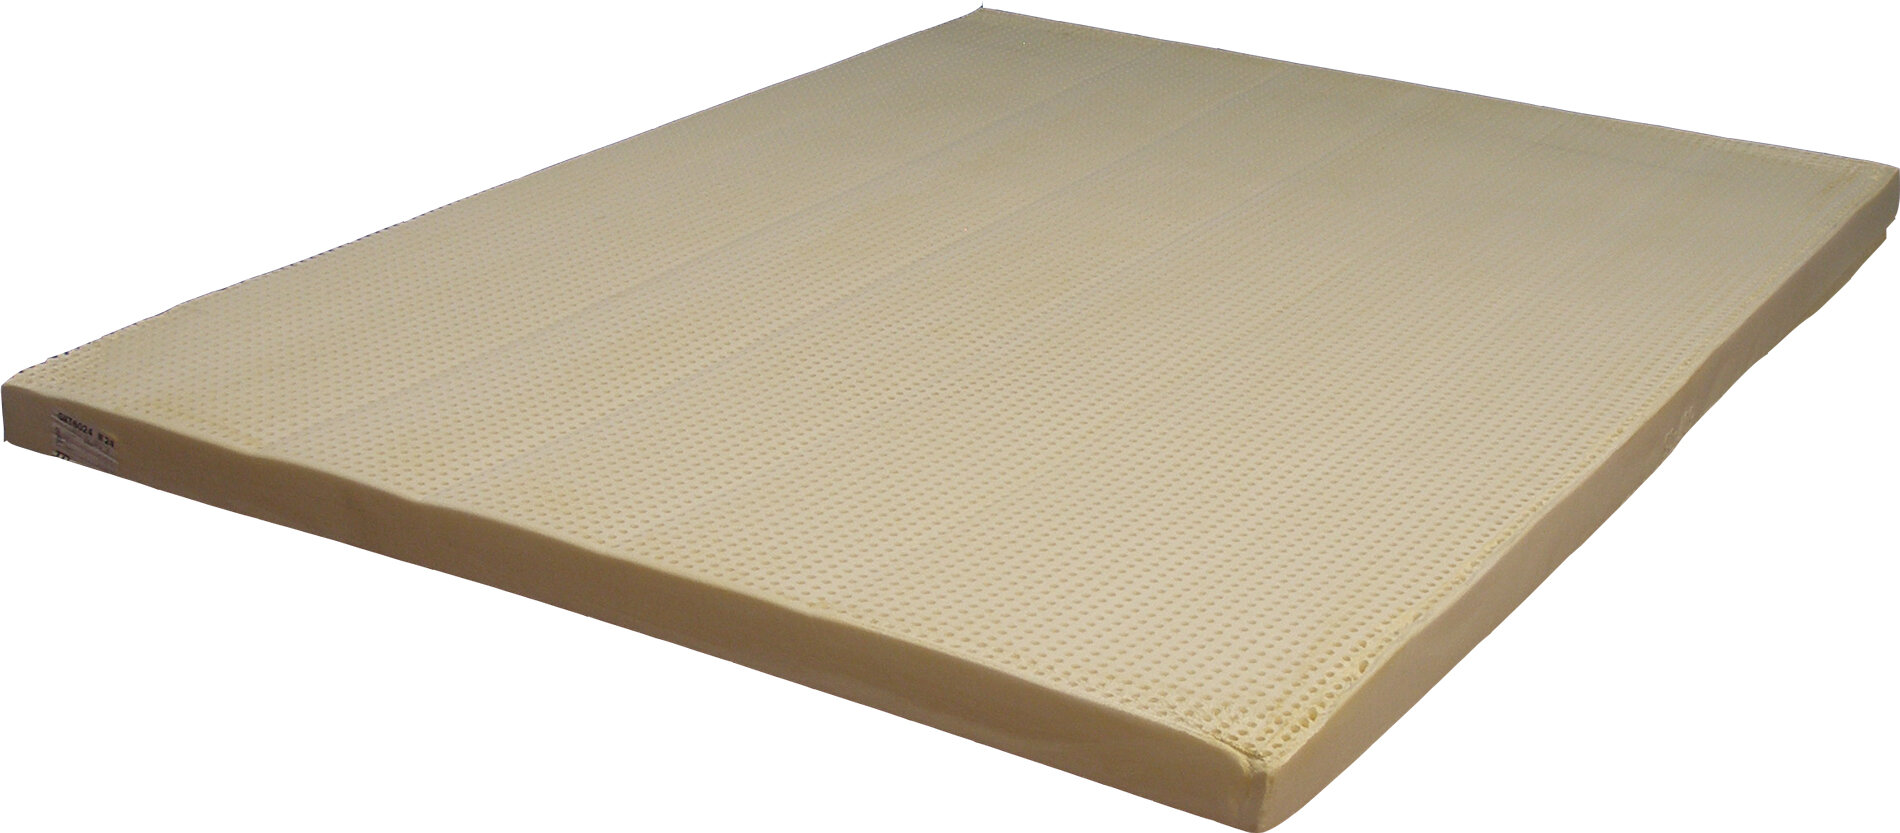 fitted sheets for latex foam mattress